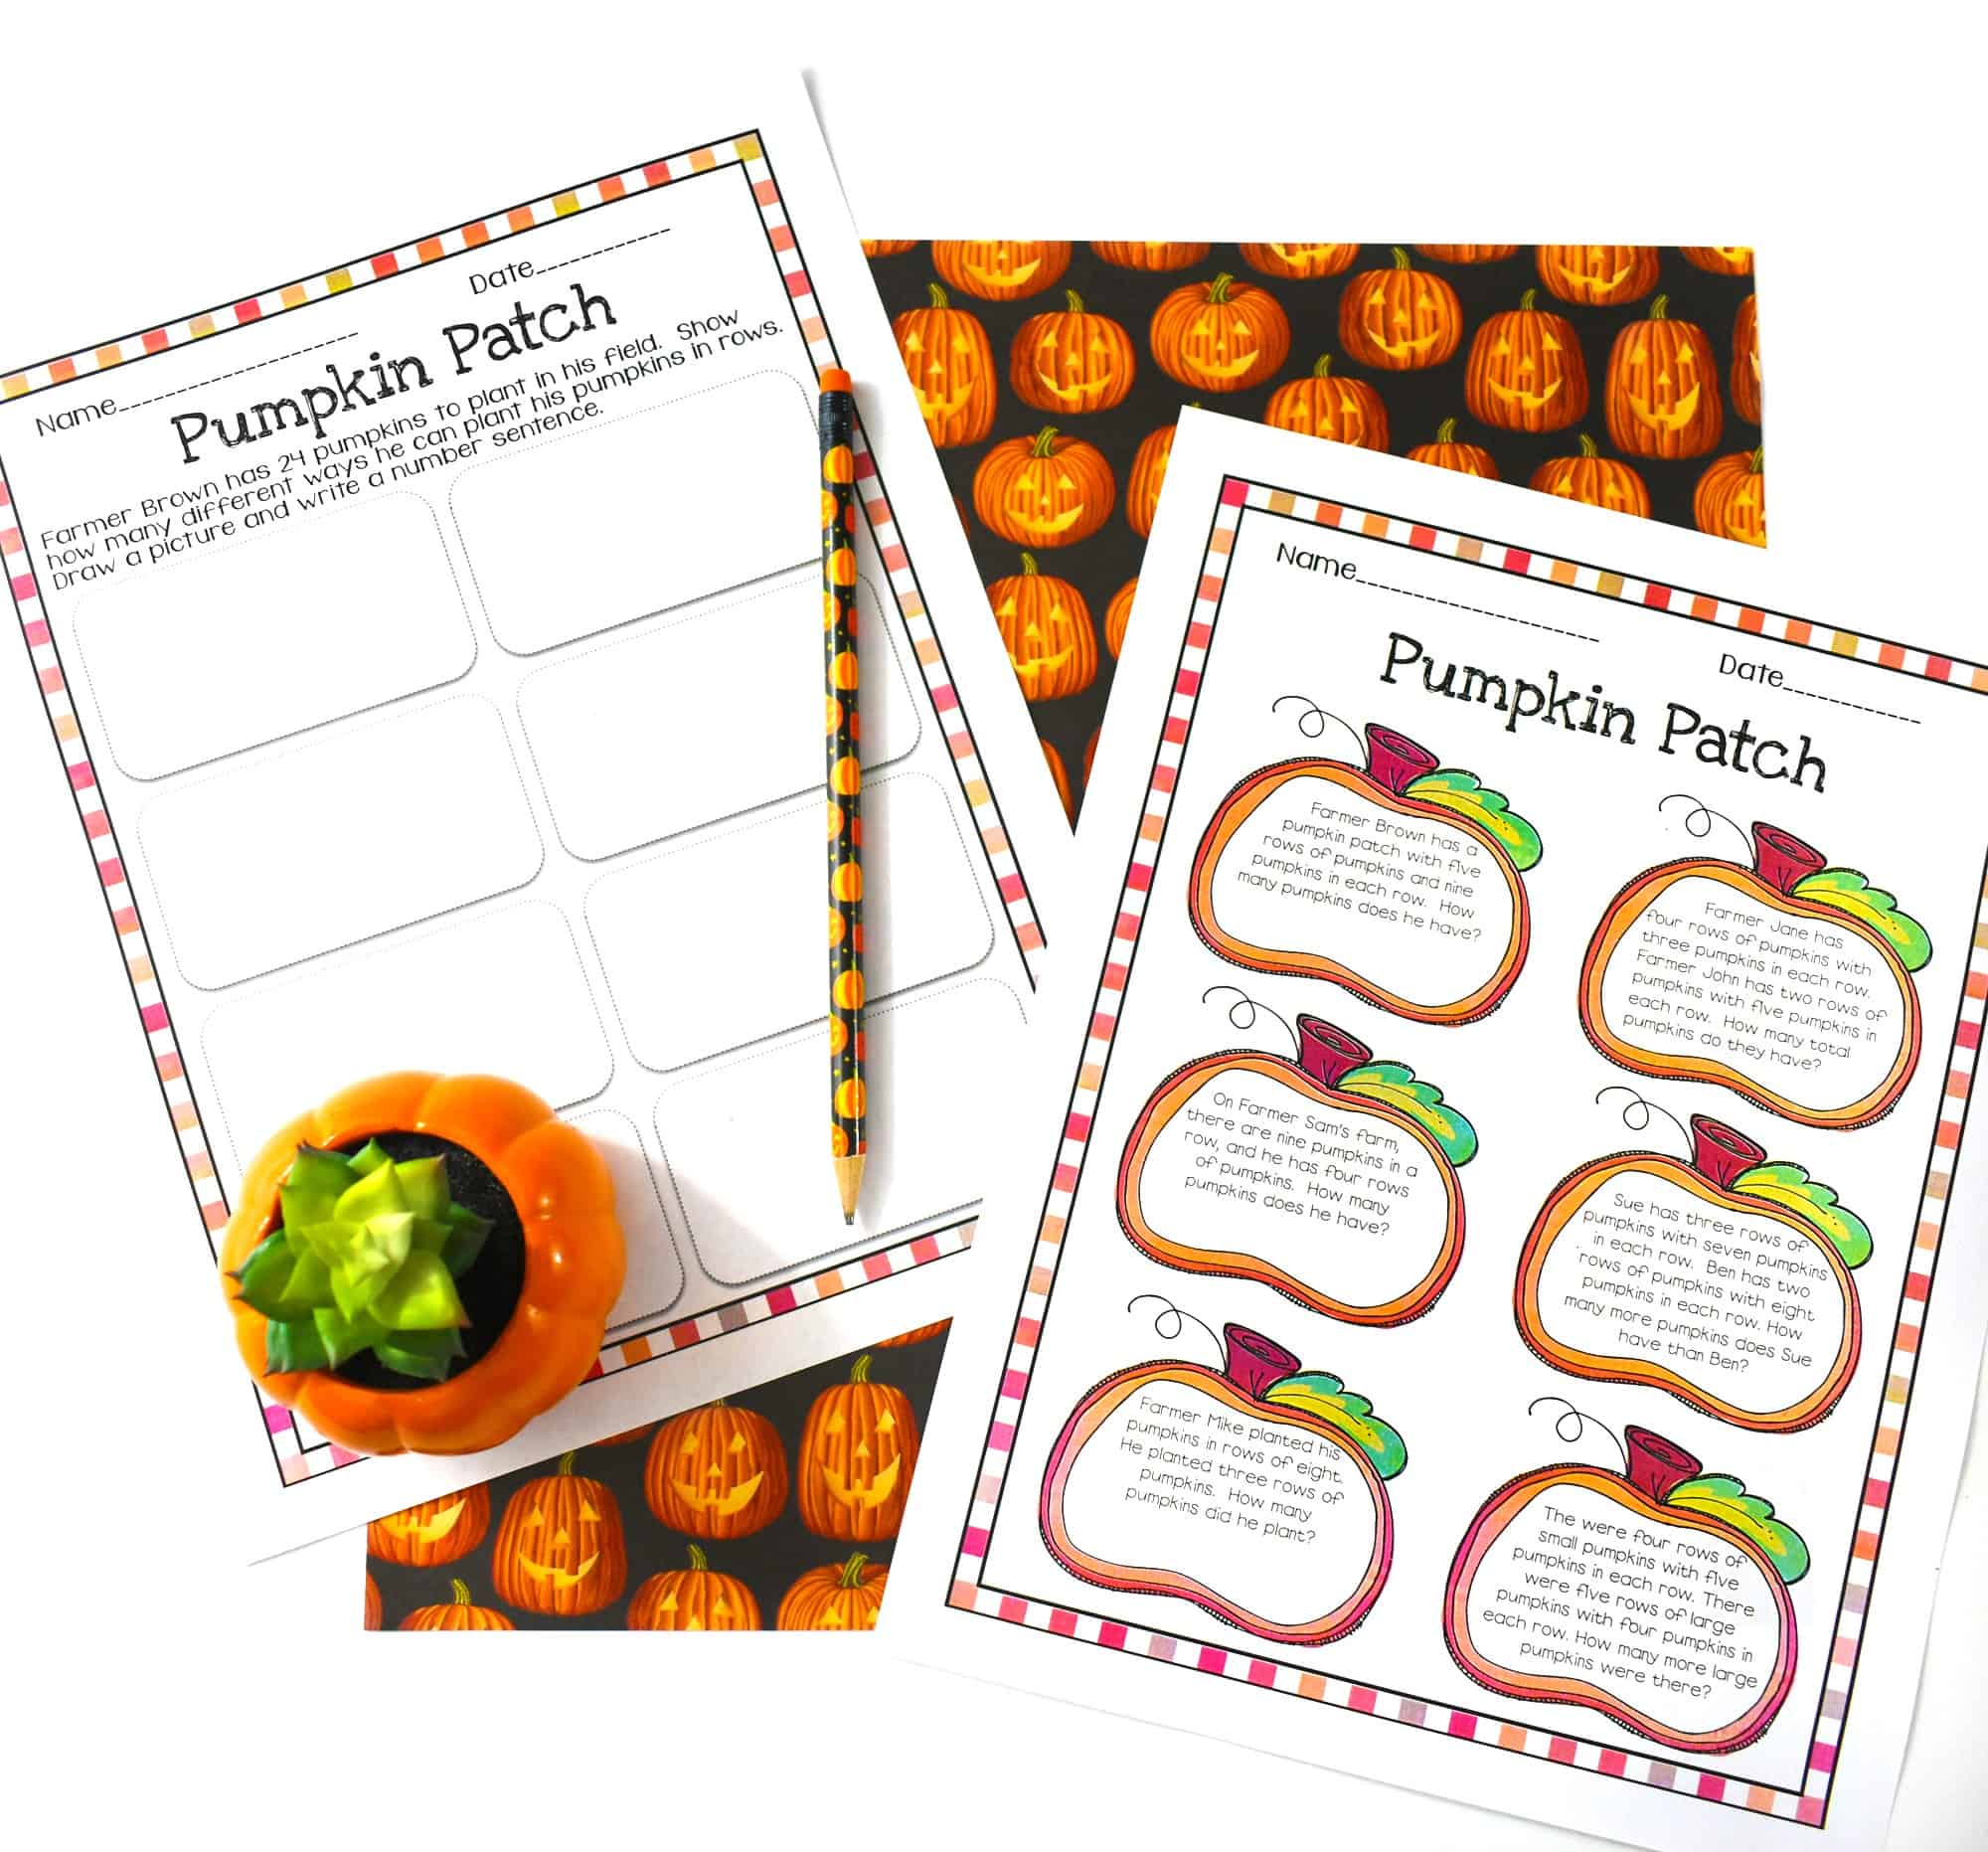 Keep your upper elementary students working on their multiplication skills around Halloween with the activities I'm sharing in this blog post! It can be hard to keep students' attention around holidays, especially a candy-filled holiday like Halloween, but these multiplication activities help! They're engaging and hands-on for 3rd grade, 4th grade, and 5th grade students. Click through to read about them!